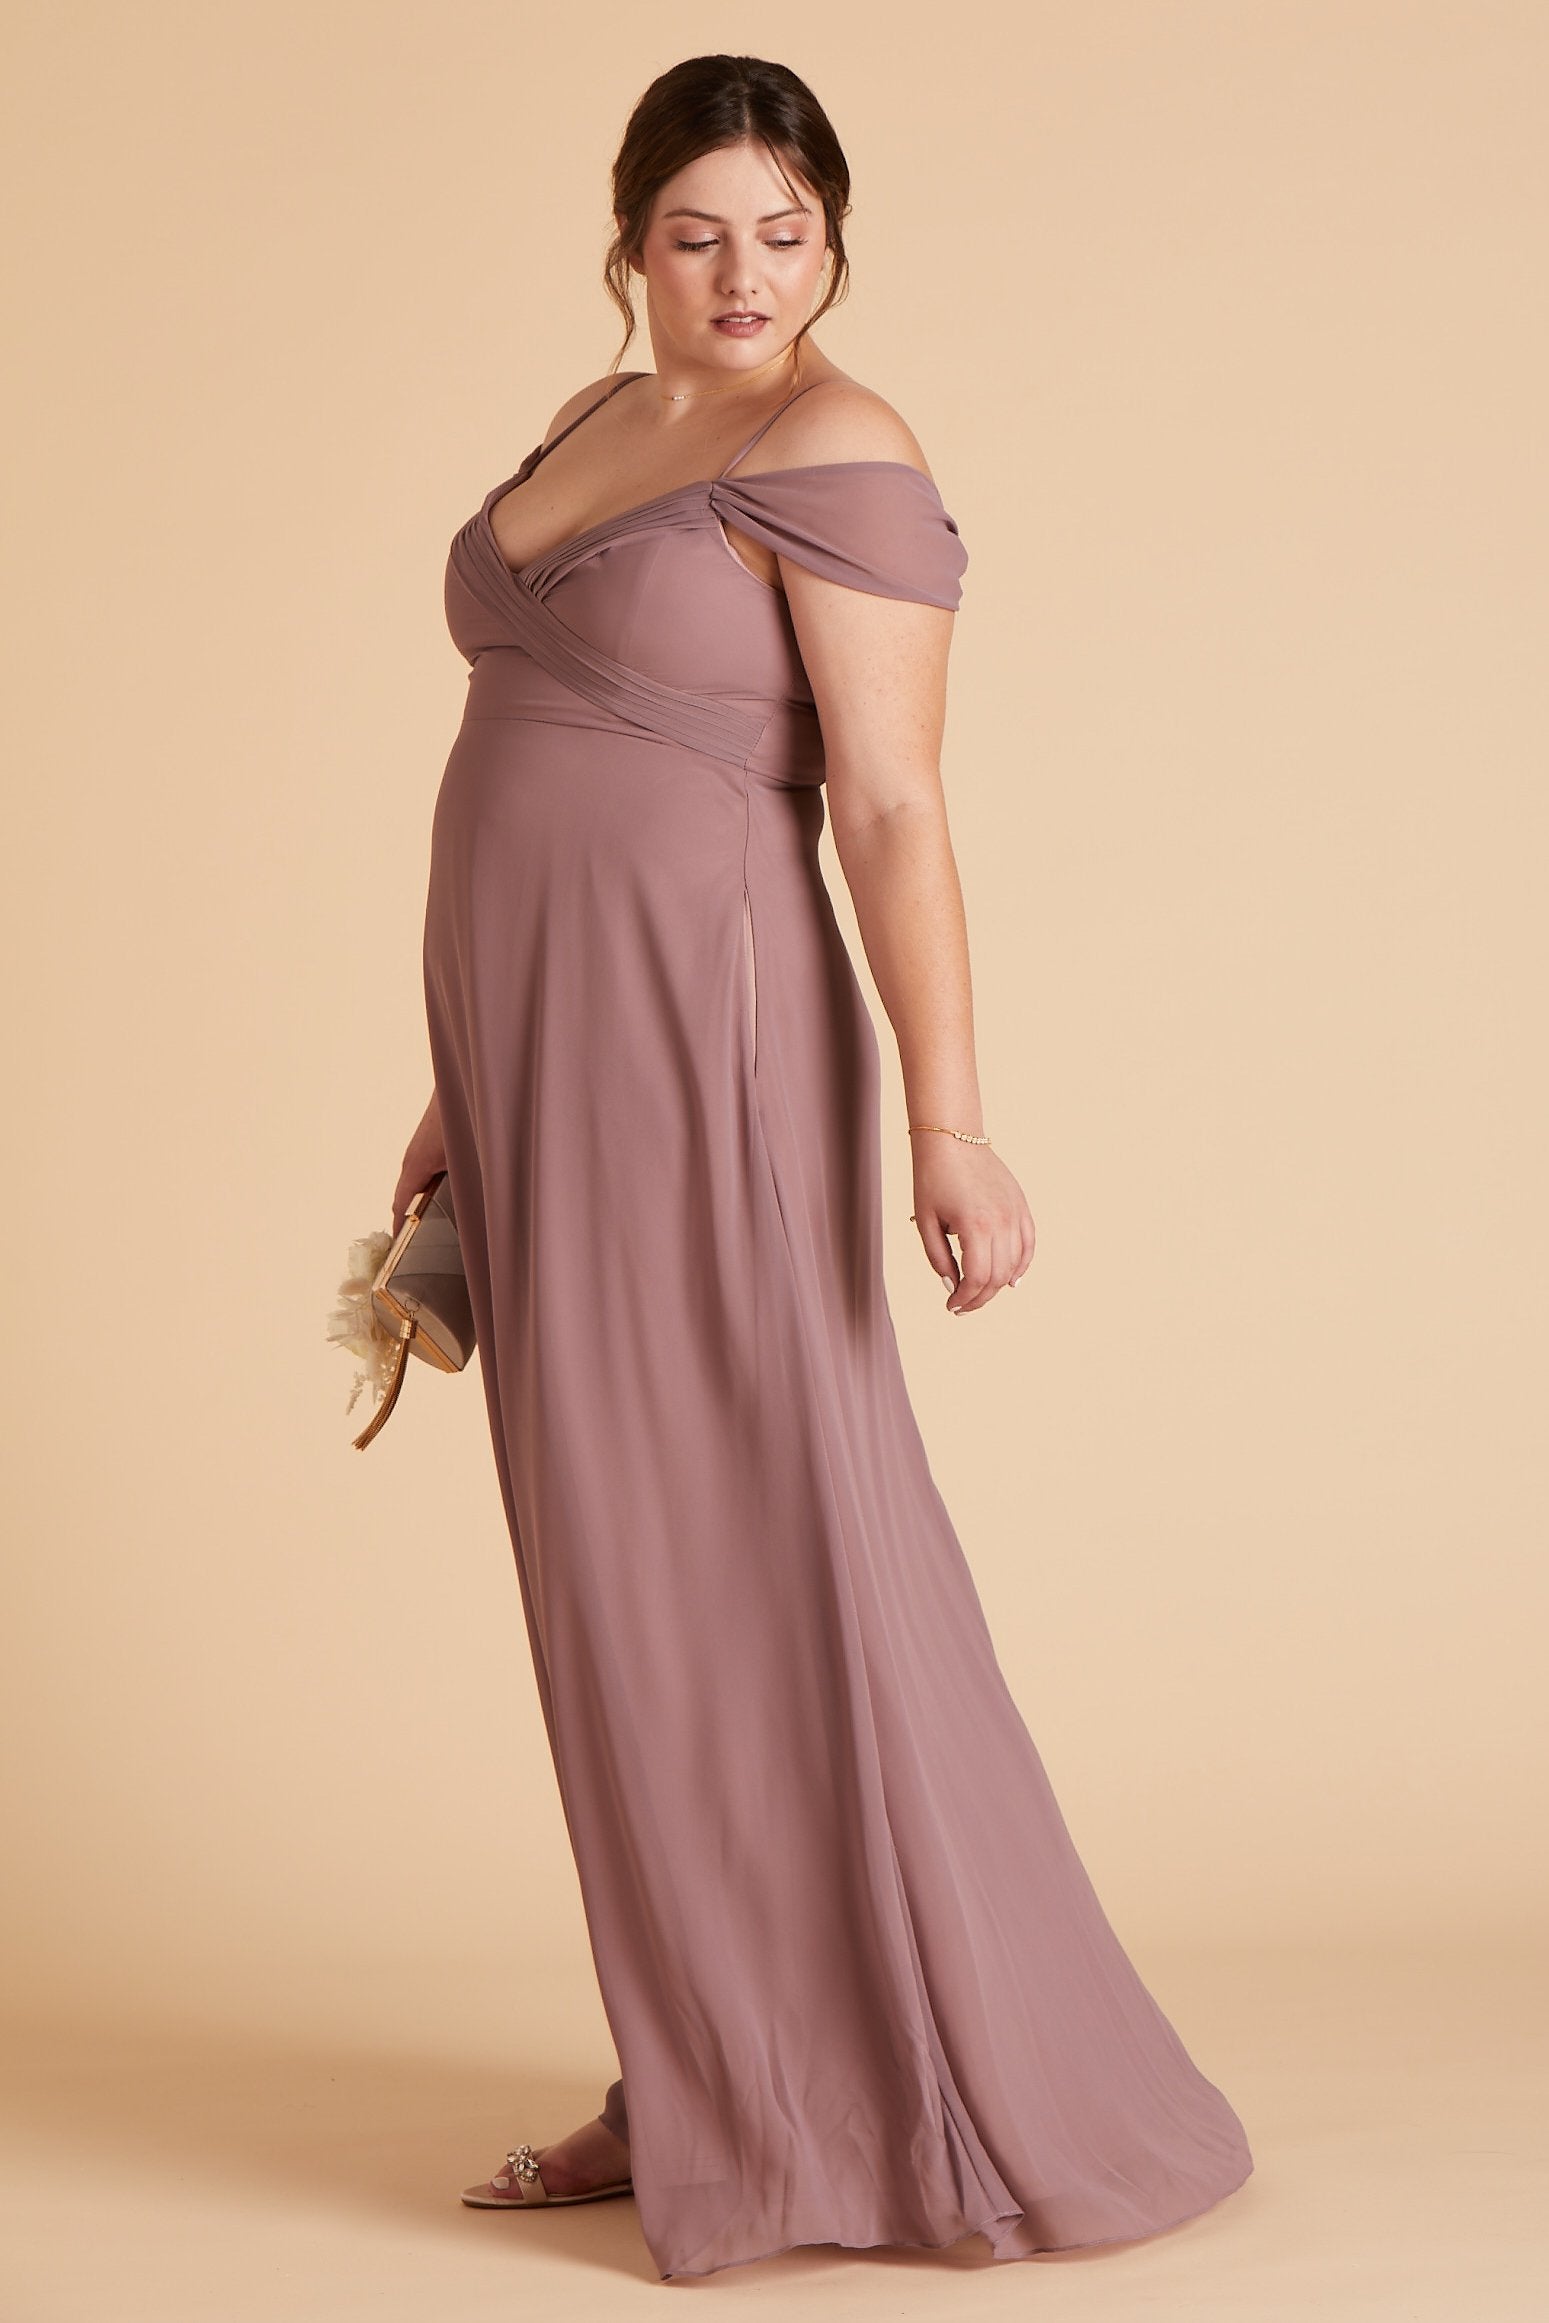 Spence convertible plus size bridesmaid dress in dark mauve chiffon by Birdy Grey, side view